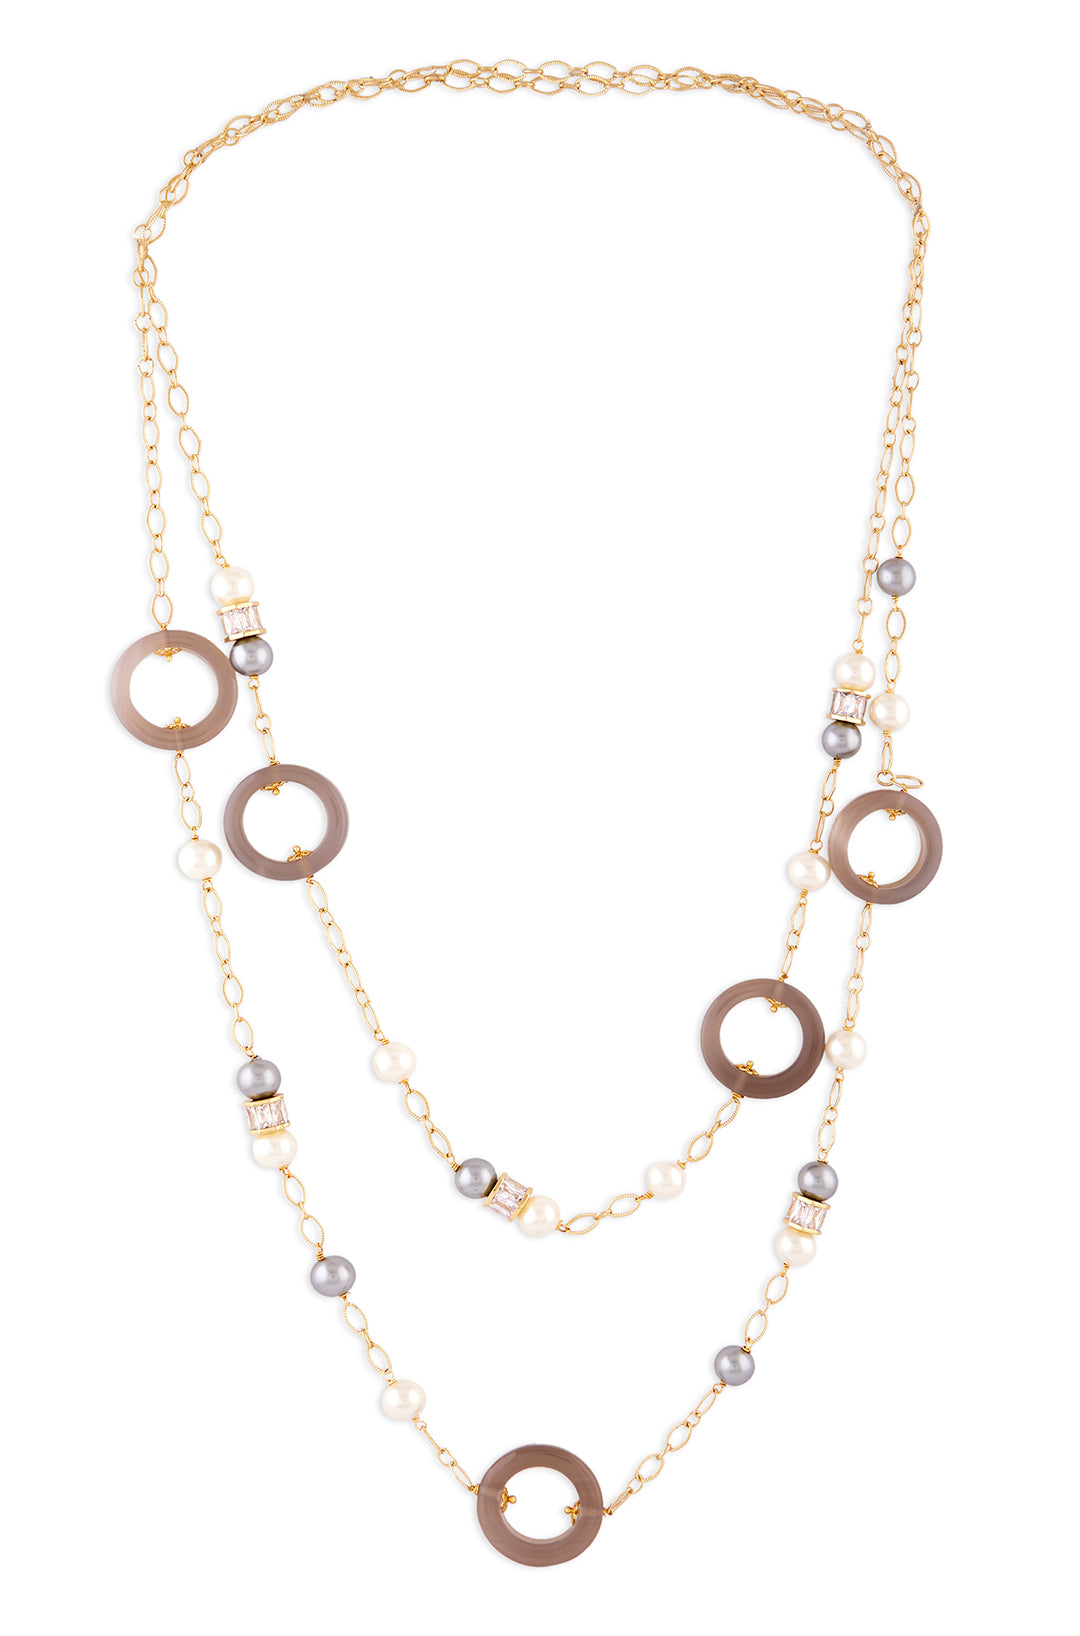 Grey Agate Rings Layered Necklace With Multi-Colour Pearls - Joules by Radhika